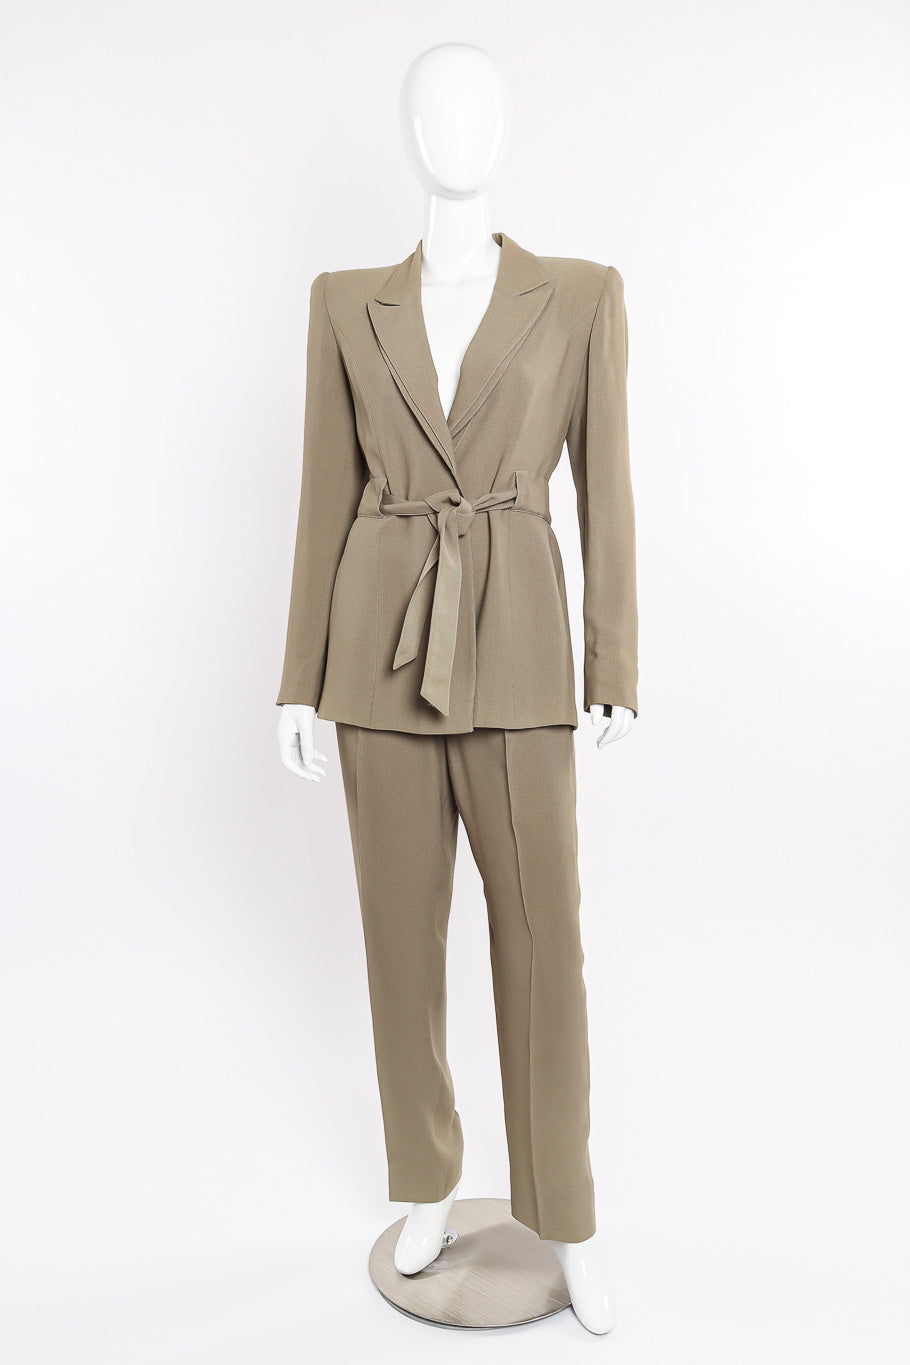  Jacket and pant suit set by State of Claude Montana on mannequin @recessla